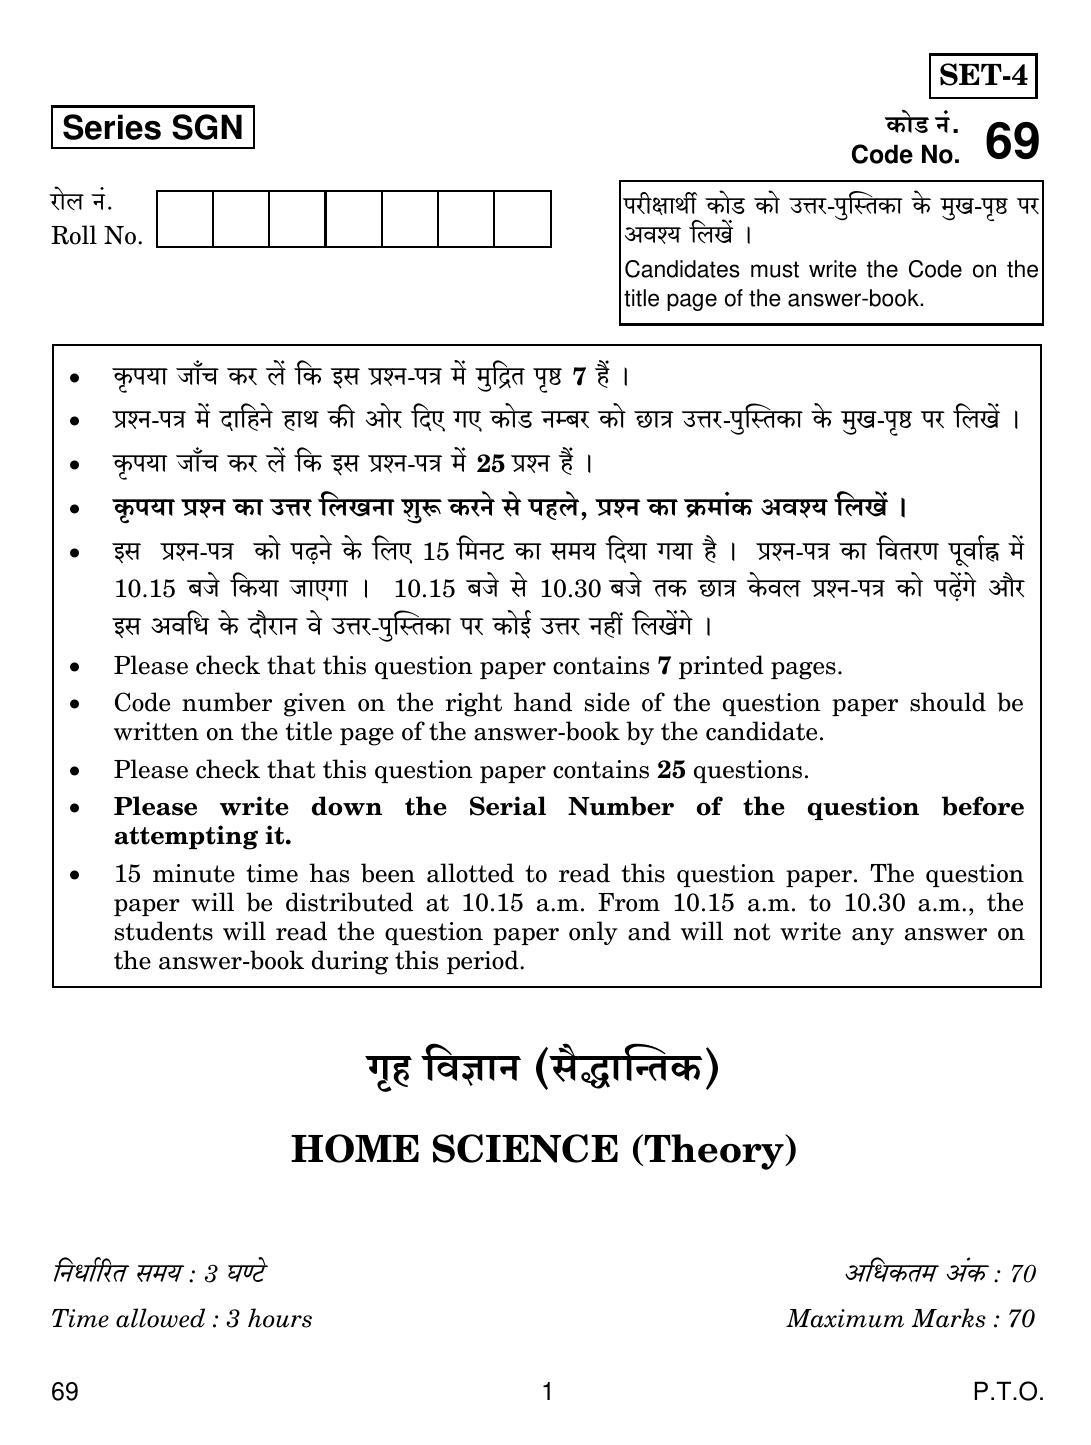 CBSE Class 12 69 HOME SCIENCE 2018 Question Paper - Page 1